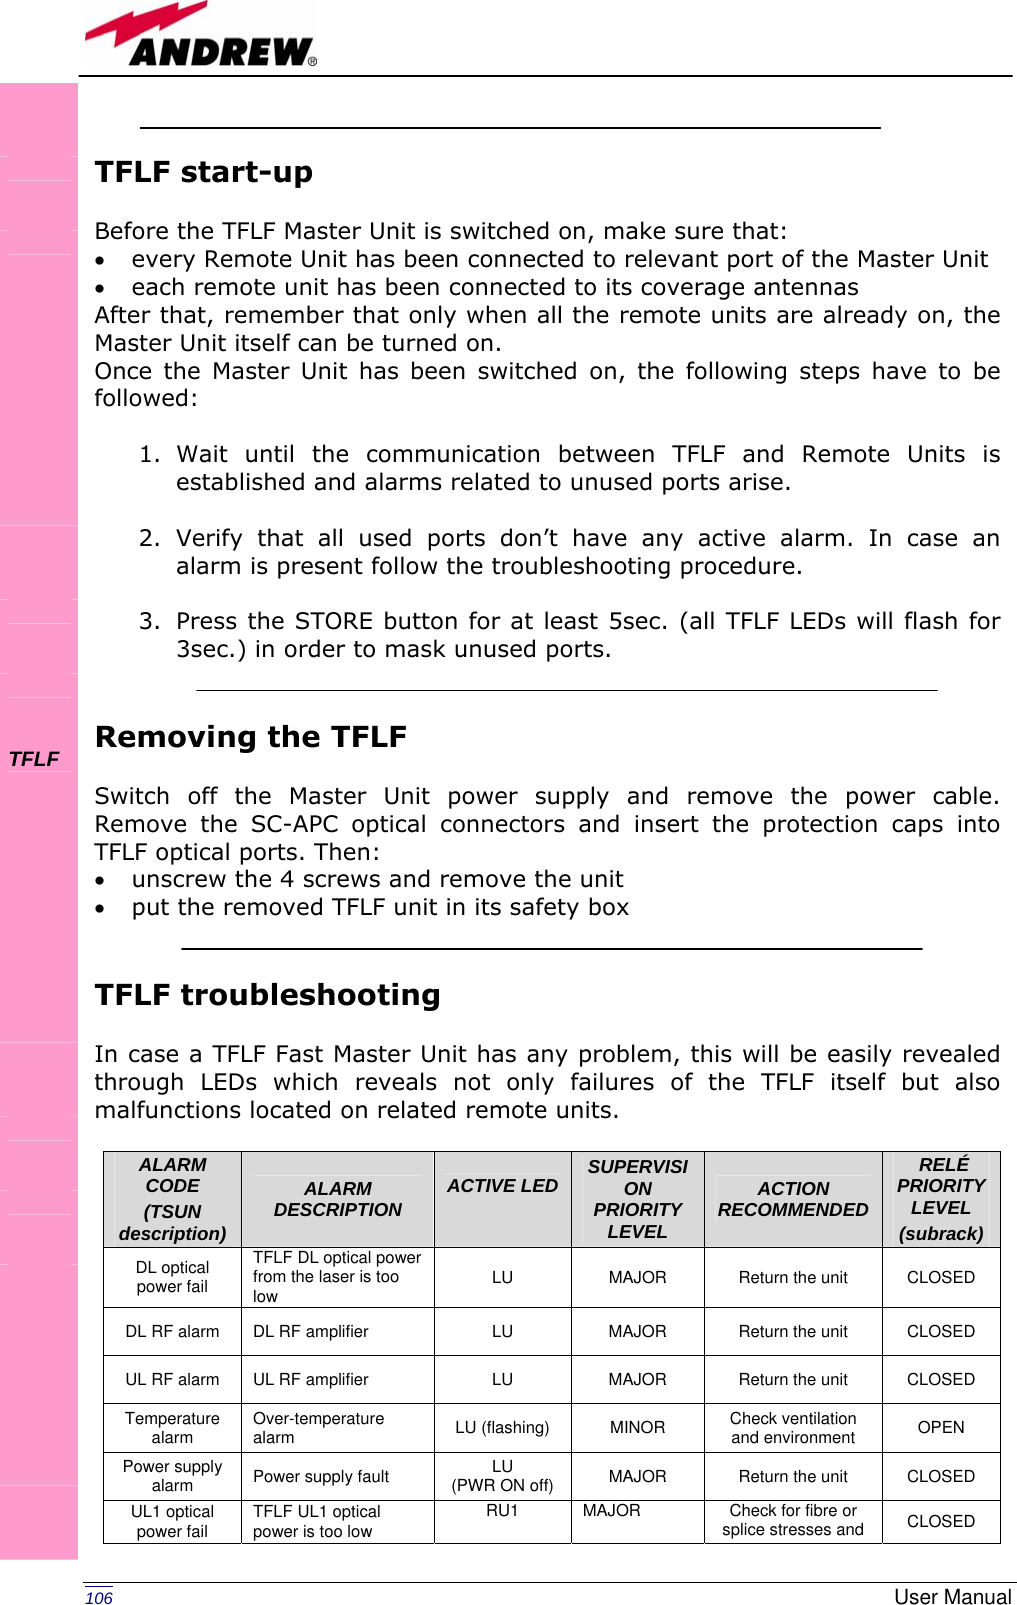   106  User Manual TFLF start-up  Before the TFLF Master Unit is switched on, make sure that: • every Remote Unit has been connected to relevant port of the Master Unit • each remote unit has been connected to its coverage antennas After that, remember that only when all the remote units are already on, the Master Unit itself can be turned on. Once the Master Unit has been switched on, the following steps have to be followed:  1. Wait until the communication between TFLF and Remote Units is established and alarms related to unused ports arise.  2. Verify that all used ports don’t have any active alarm. In case an alarm is present follow the troubleshooting procedure.  3. Press the STORE button for at least 5sec. (all TFLF LEDs will flash for 3sec.) in order to mask unused ports.   Removing the TFLF  Switch off the Master Unit power supply and remove the power cable. Remove the SC-APC optical connectors and insert the protection caps into TFLF optical ports. Then:  • unscrew the 4 screws and remove the unit • put the removed TFLF unit in its safety box   TFLF troubleshooting  In case a TFLF Fast Master Unit has any problem, this will be easily revealed through LEDs which reveals not only failures of the TFLF itself but also malfunctions located on related remote units.  ALARM CODE (TSUN description) ALARM DESCRIPTION  ACTIVE LED  SUPERVISION PRIORITY LEVEL ACTION RECOMMENDED  RELÉ PRIORITY LEVEL (subrack) DL optical power fail TFLF DL optical power from the laser is too low  LU  MAJOR  Return the unit  CLOSED DL RF alarm  DL RF amplifier  LU  MAJOR  Return the unit  CLOSED UL RF alarm  UL RF amplifier  LU  MAJOR  Return the unit  CLOSED Temperature alarm  Over-temperature alarm  LU (flashing)  MINOR  Check ventilation and environment  OPEN Power supply alarm  Power supply fault  LU (PWR ON off)  MAJOR  Return the unit  CLOSED UL1 optical power fail  TFLF UL1 optical power is too low RU1  MAJOR  Check for fibre or splice stresses and  CLOSED          TFLF           